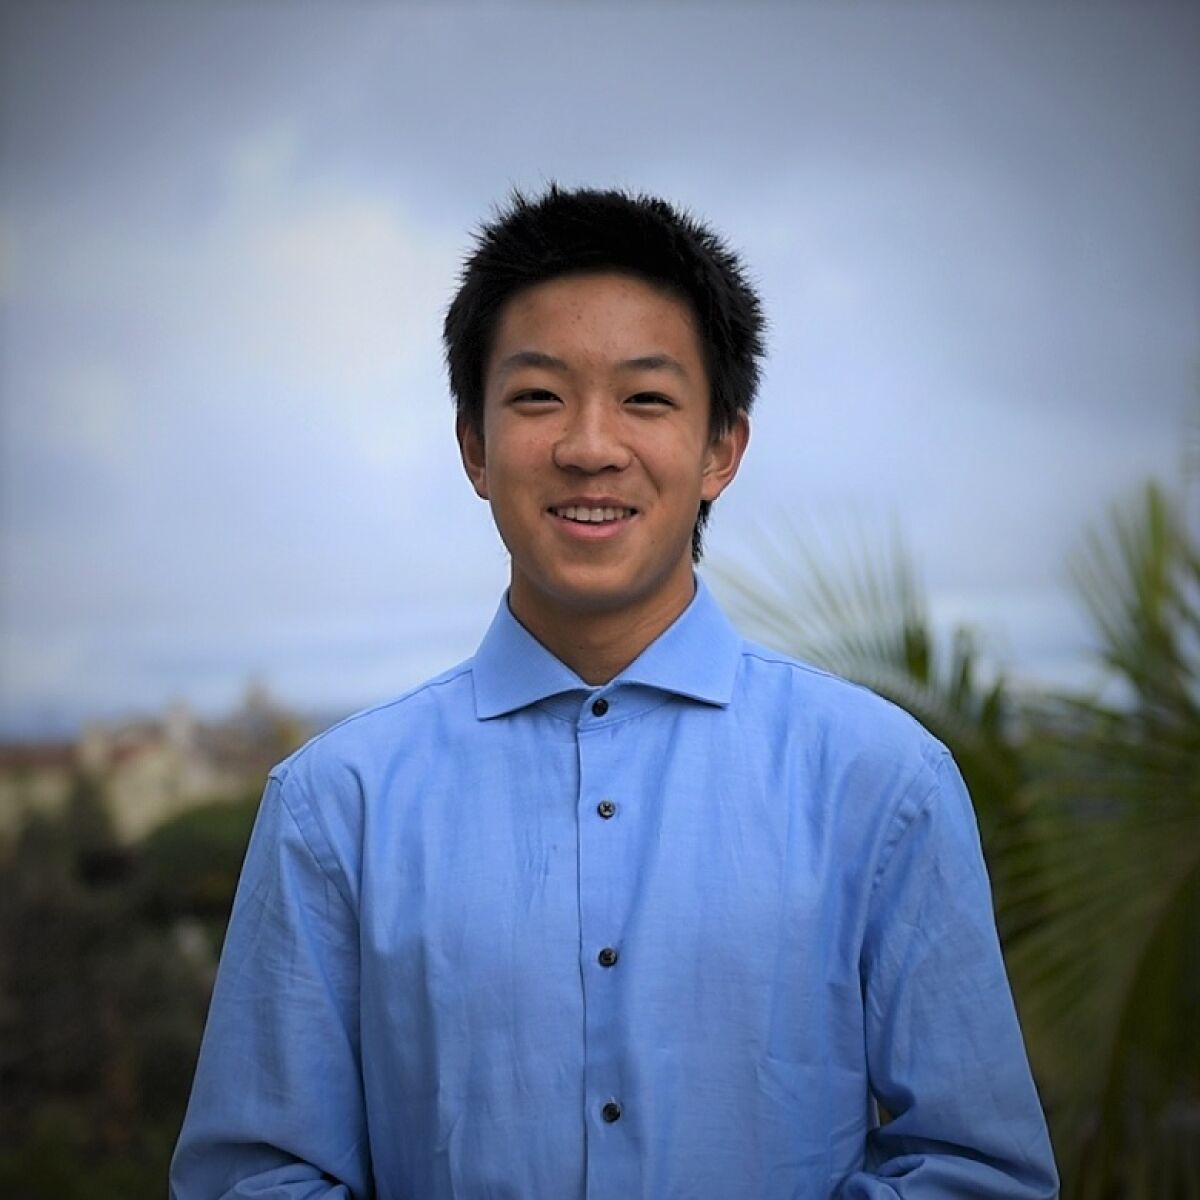 Michael Zeng, an incoming Bishop's School senior, has a passion for robotics and leadership.